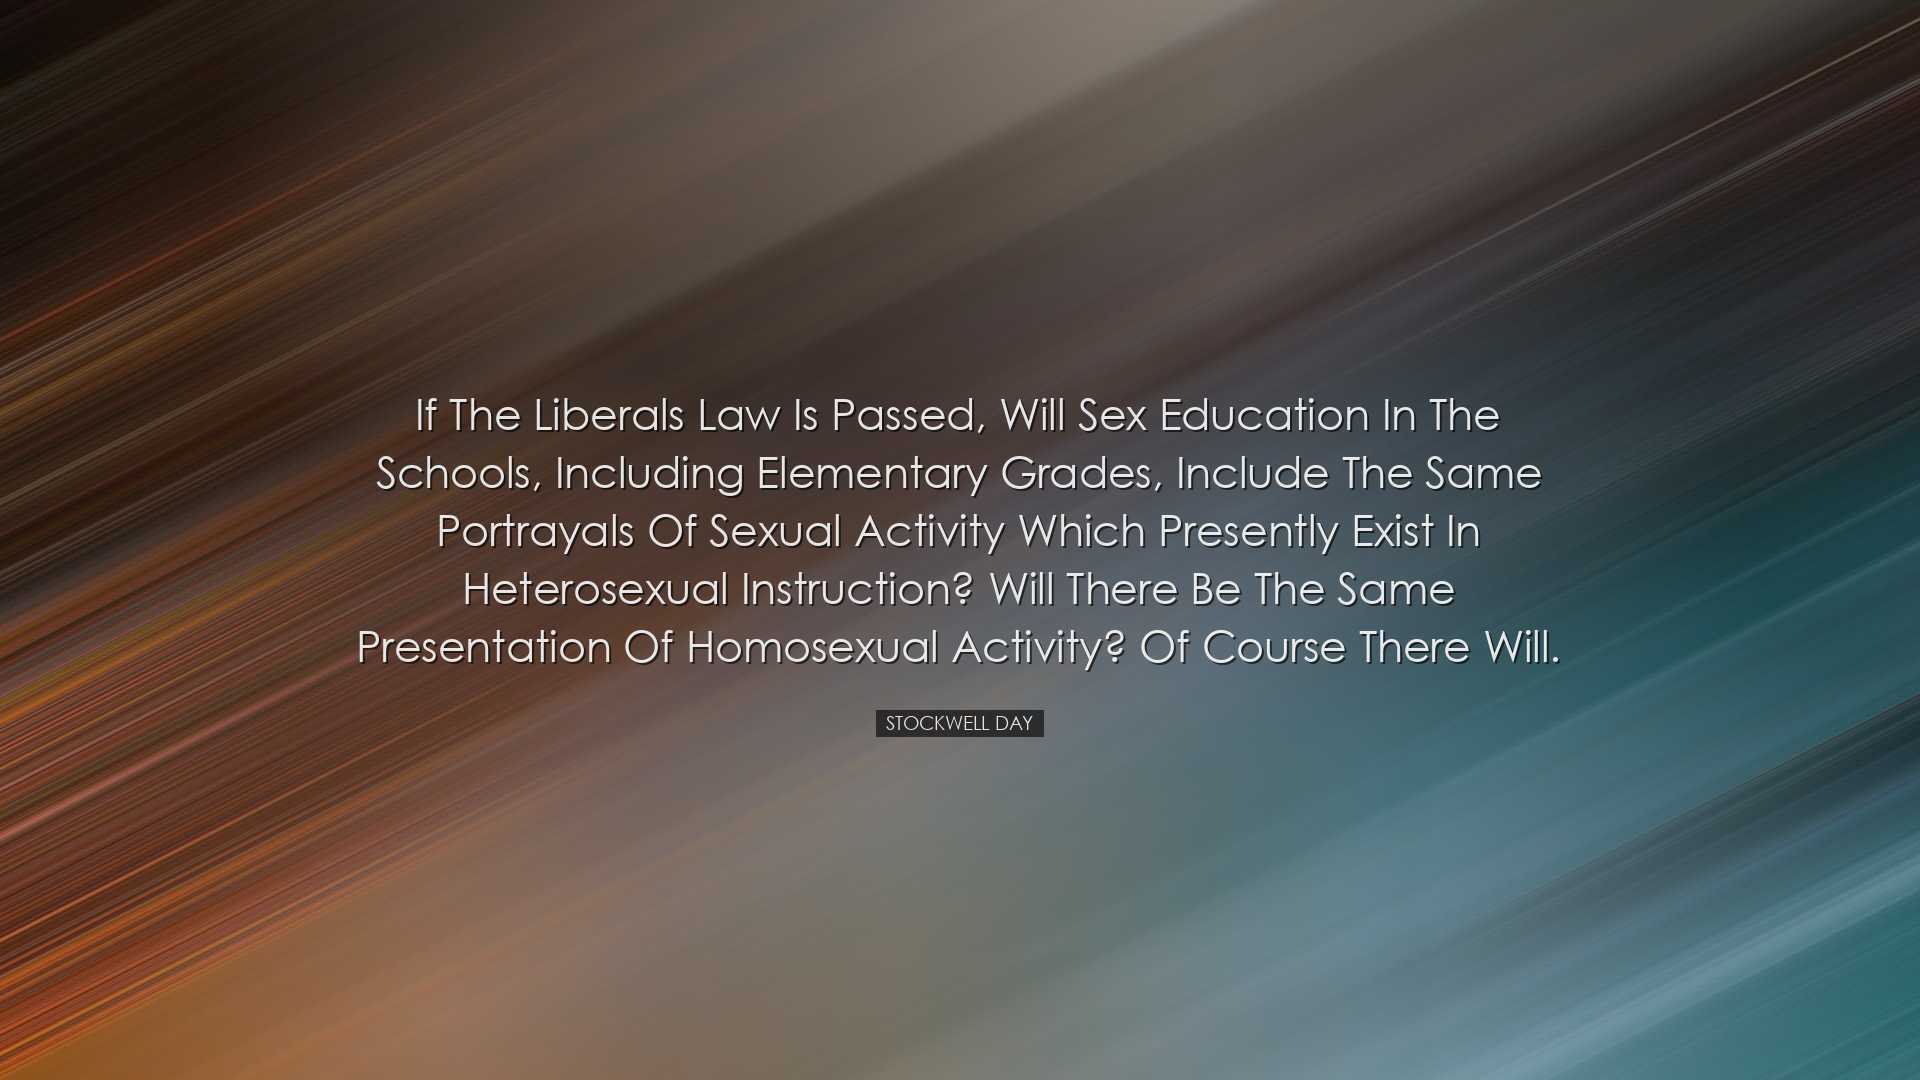 If the Liberals law is passed, will sex education in the schools,